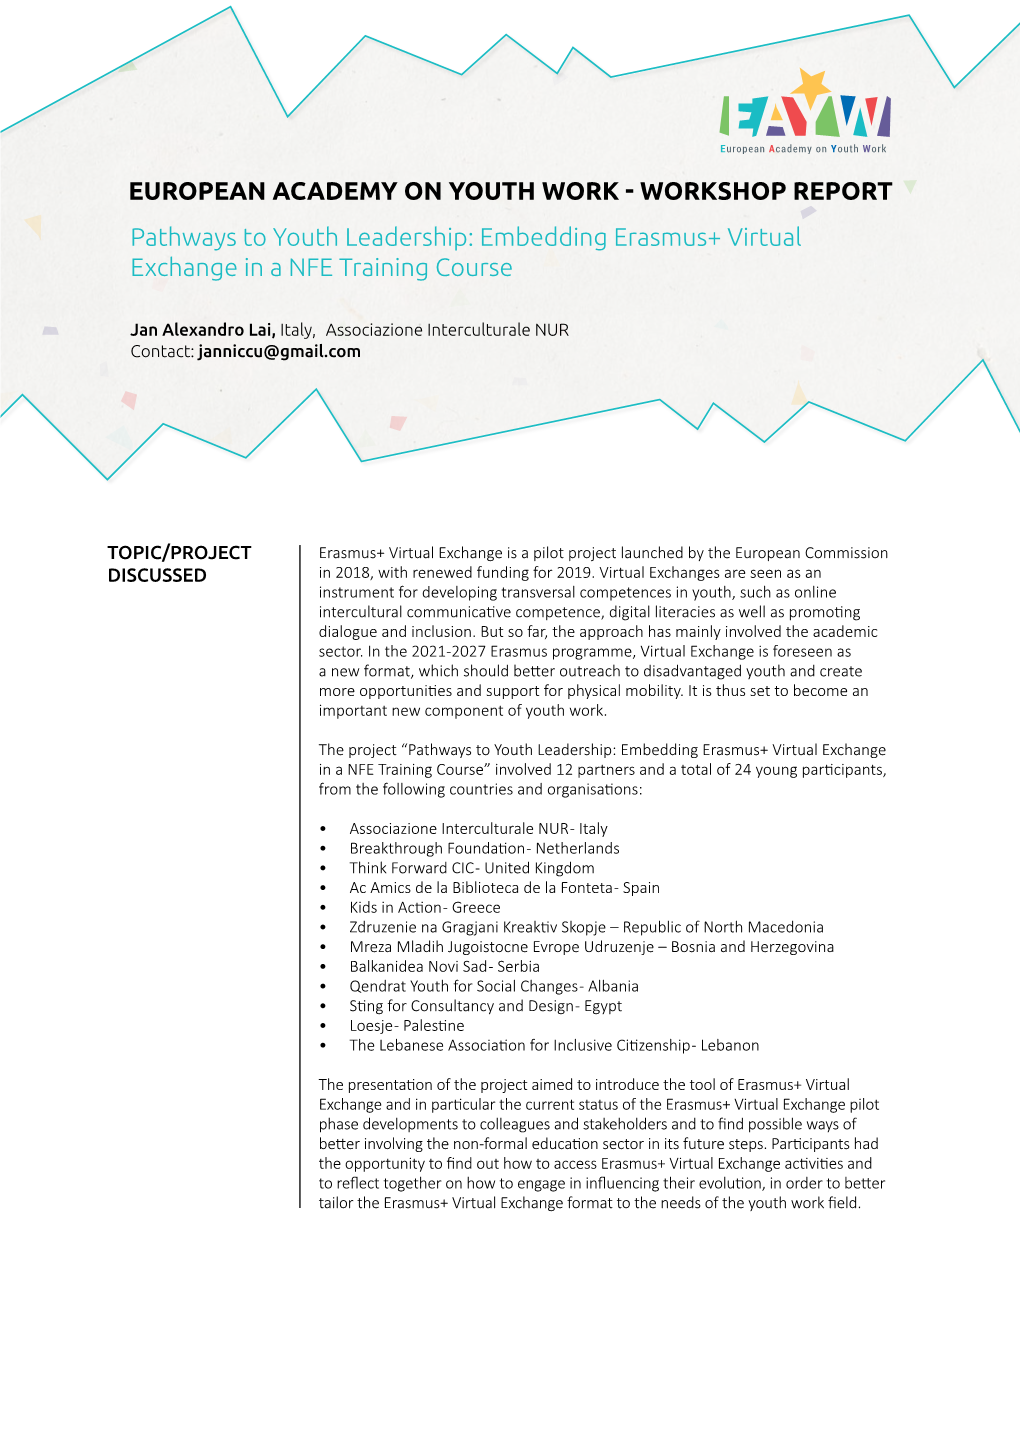 WORKSHOP REPORT Pathways to Youth Leadership: Embedding Erasmus+ Virtual Exchange in a NFE Training Course